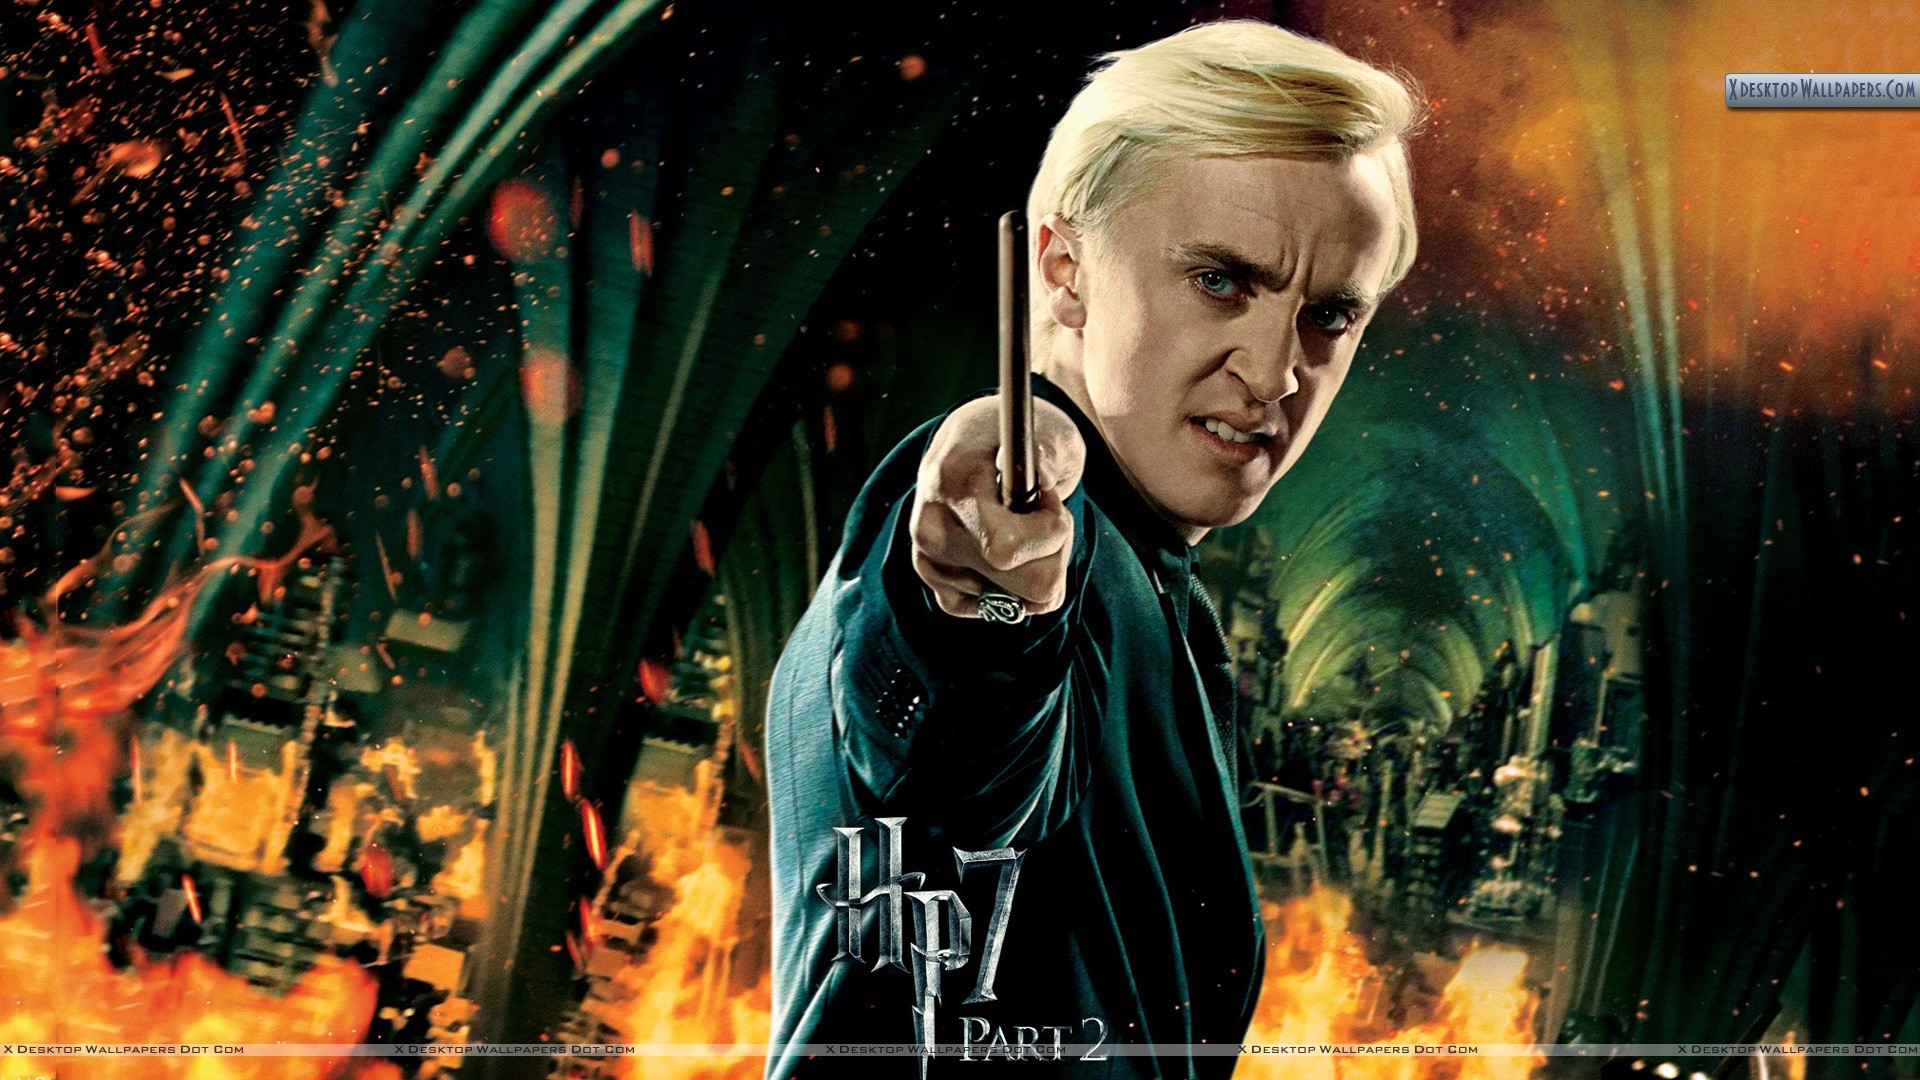 1920x1080 You are viewing wallpaper titled "Tom Felton ...